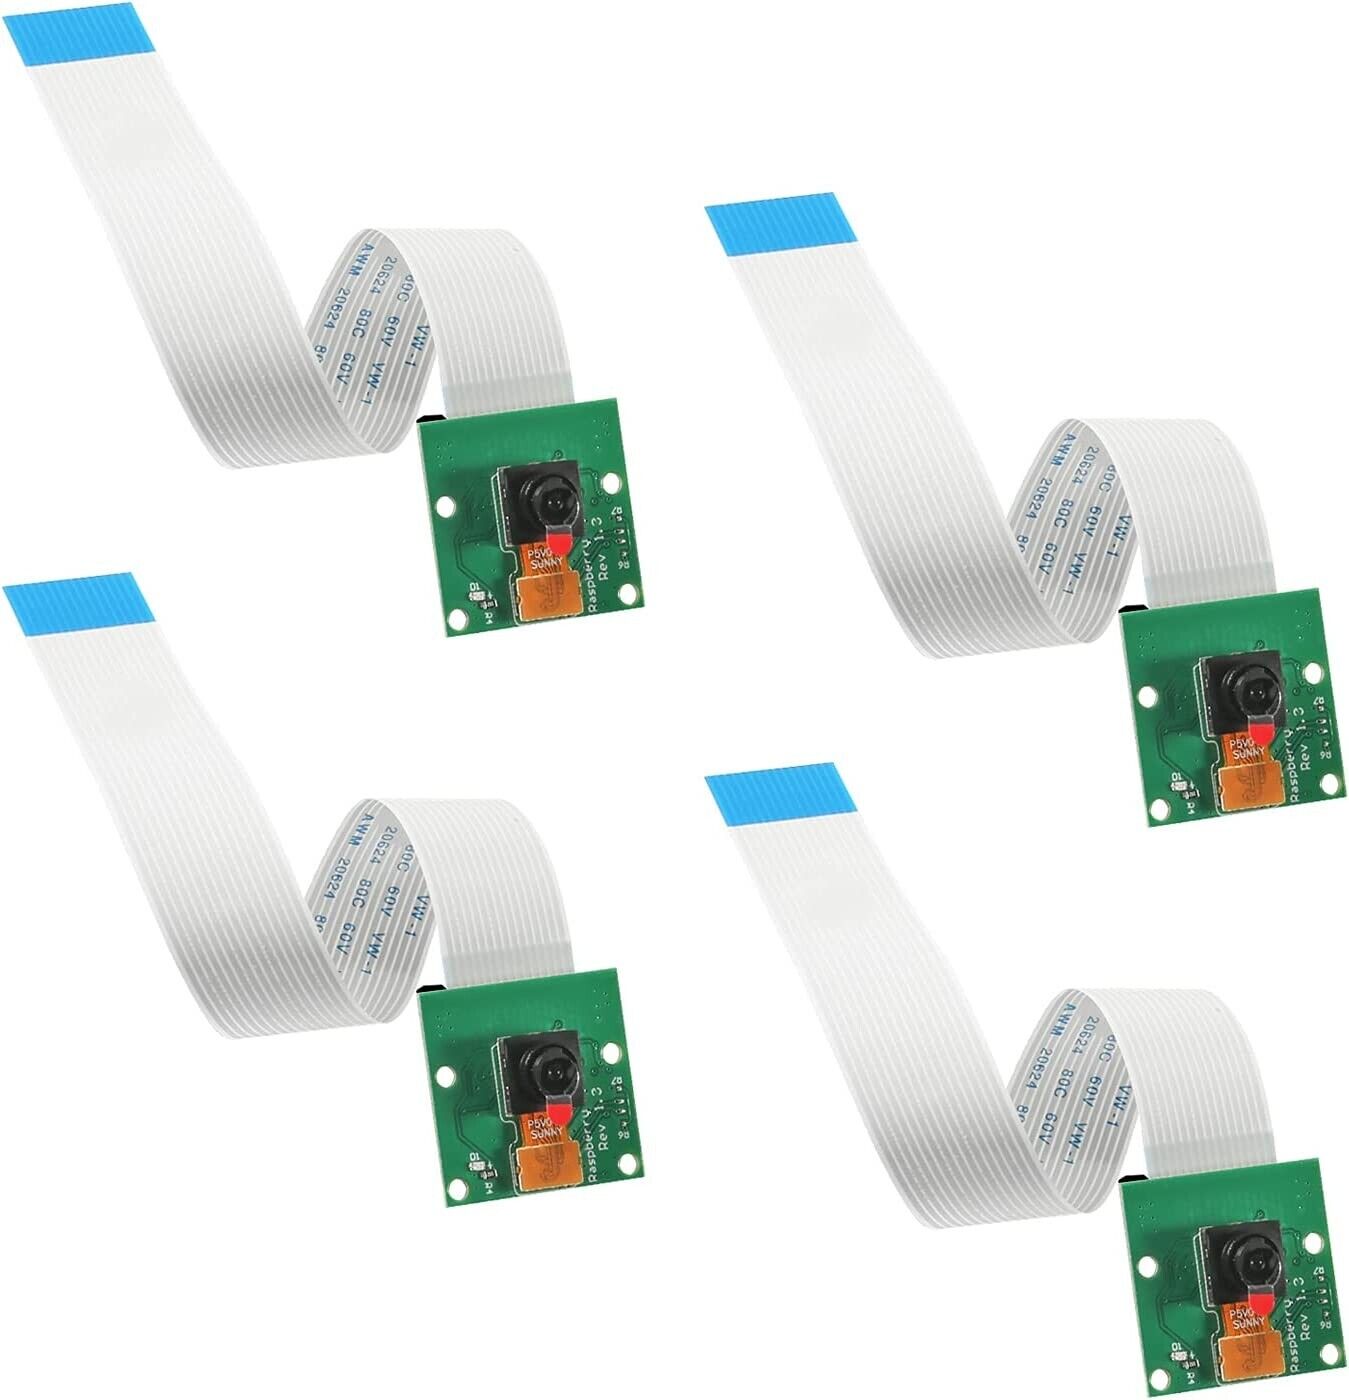 Pack of 4 Raspberry Pi Camera Board v1.3 (5MP, 1080p HD Video Recording at 30fps!) + 15cm Ribbon Cable